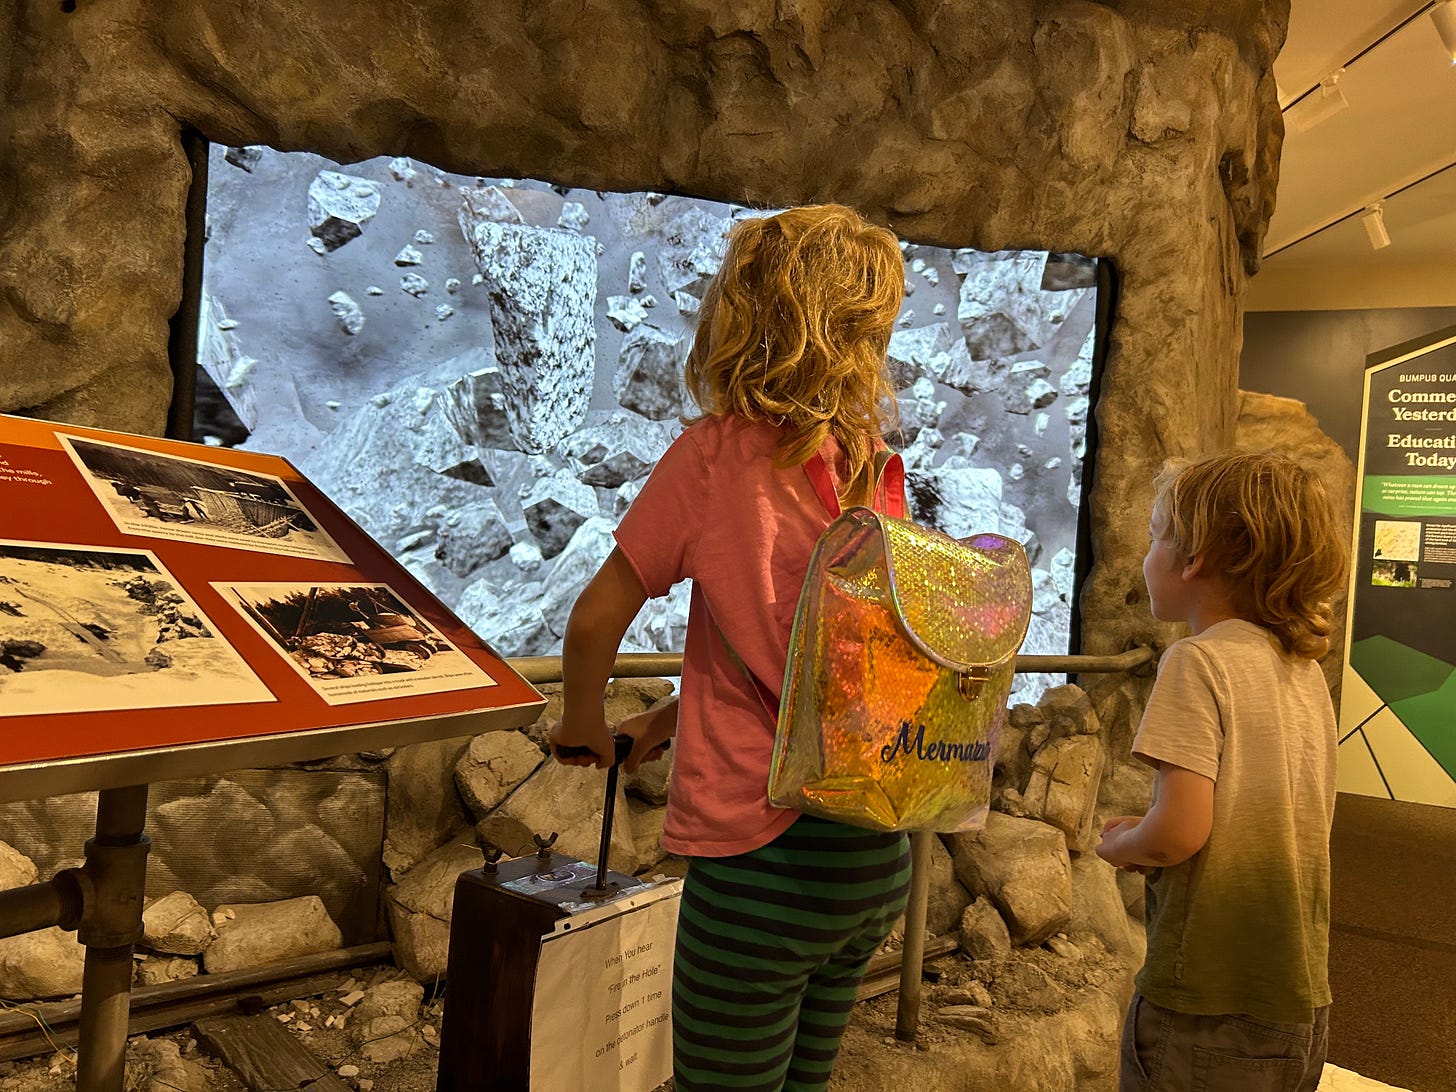 Two children with blonde hair at museum exhibit pretending to blow up part of a mineral quarry with dynamite